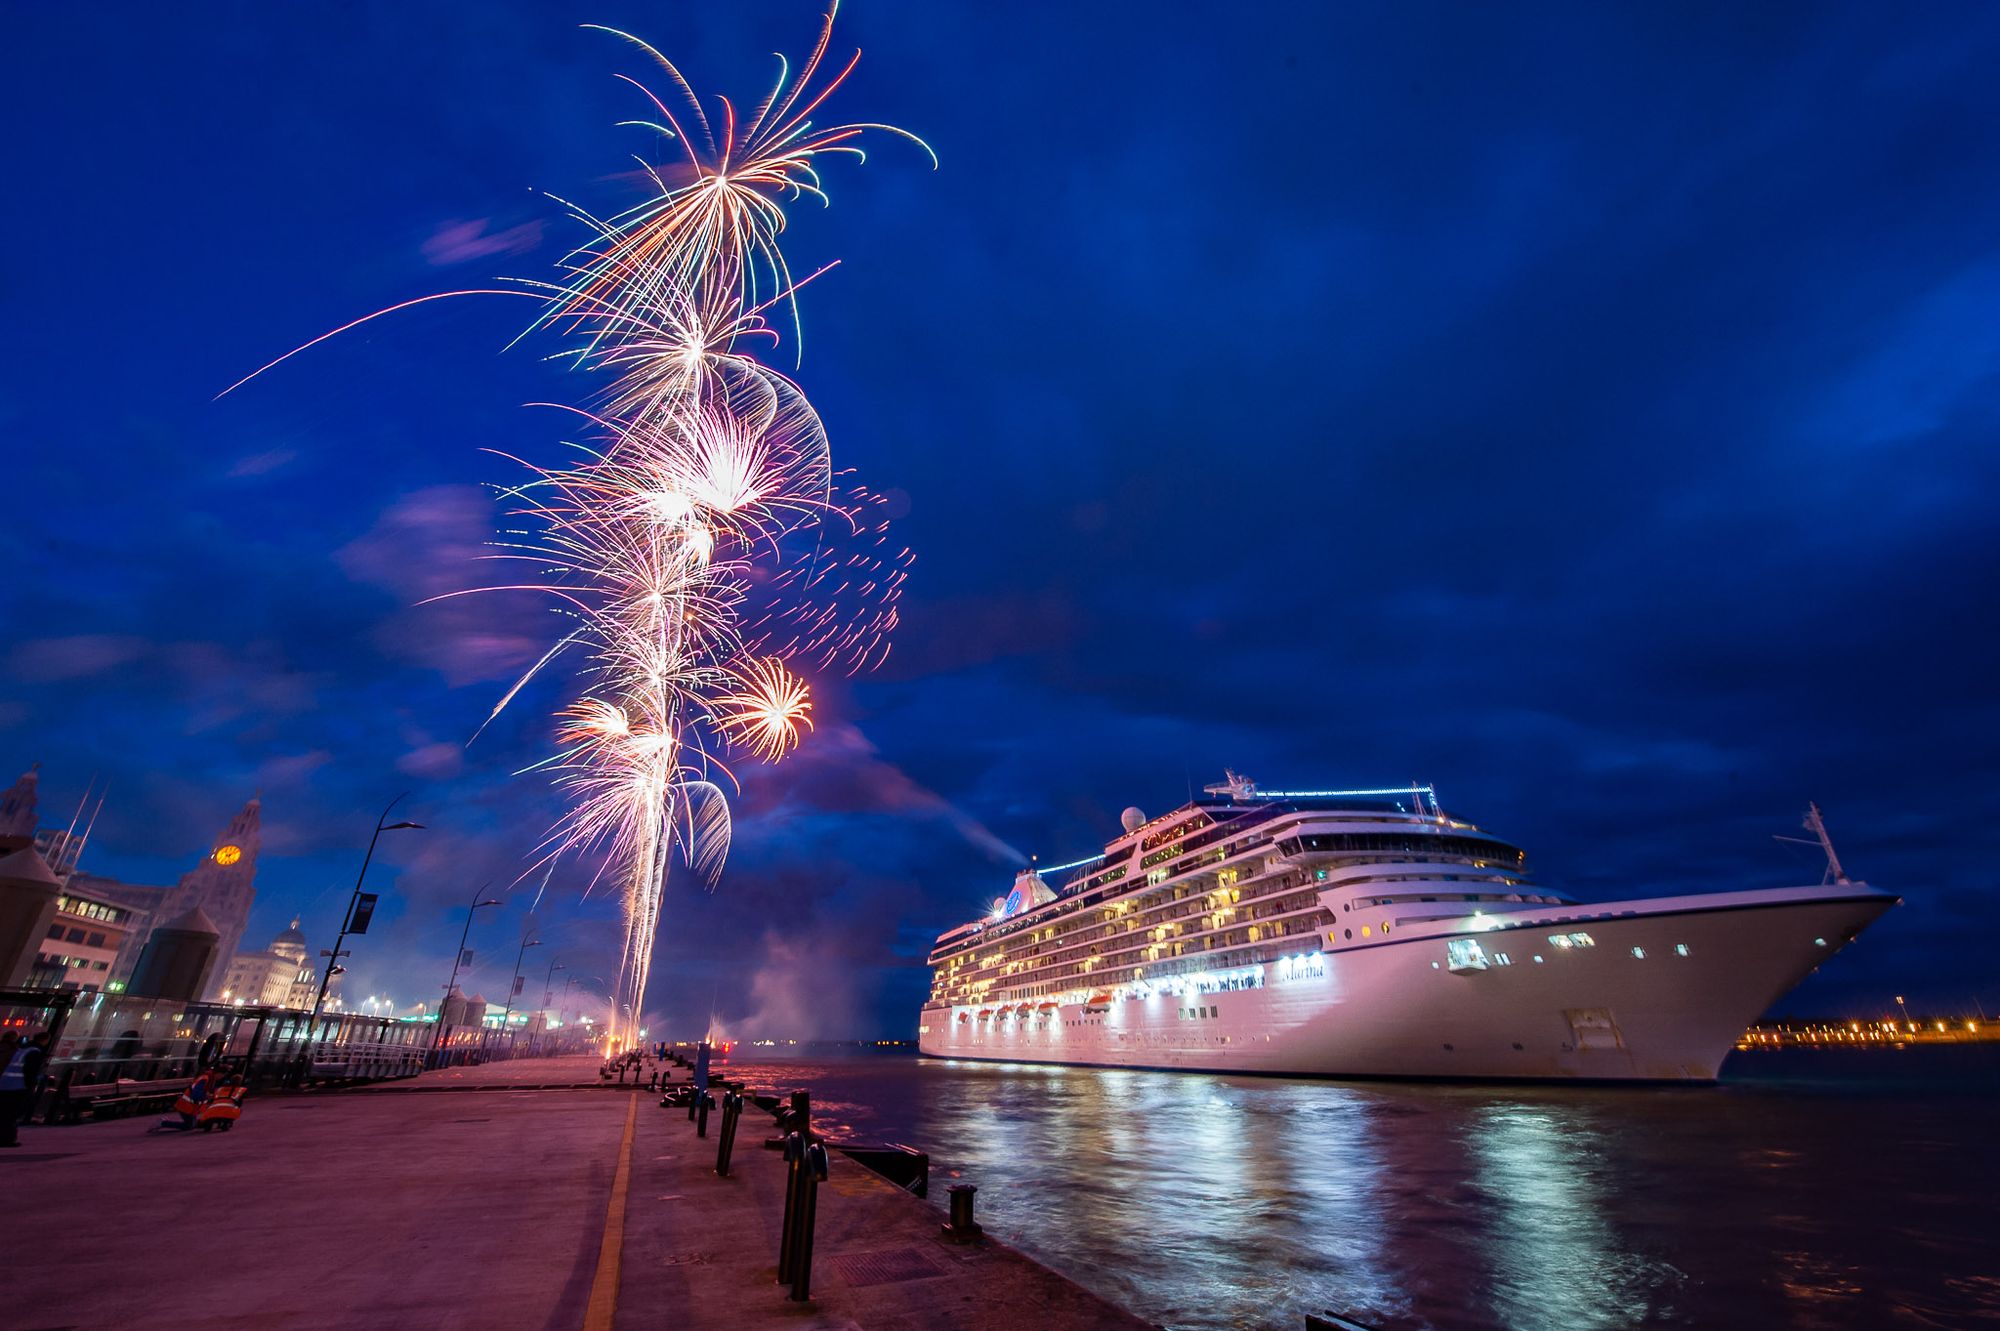 Fireworks fire off from a landing stage while a cruise ship floats in the River Mersey.